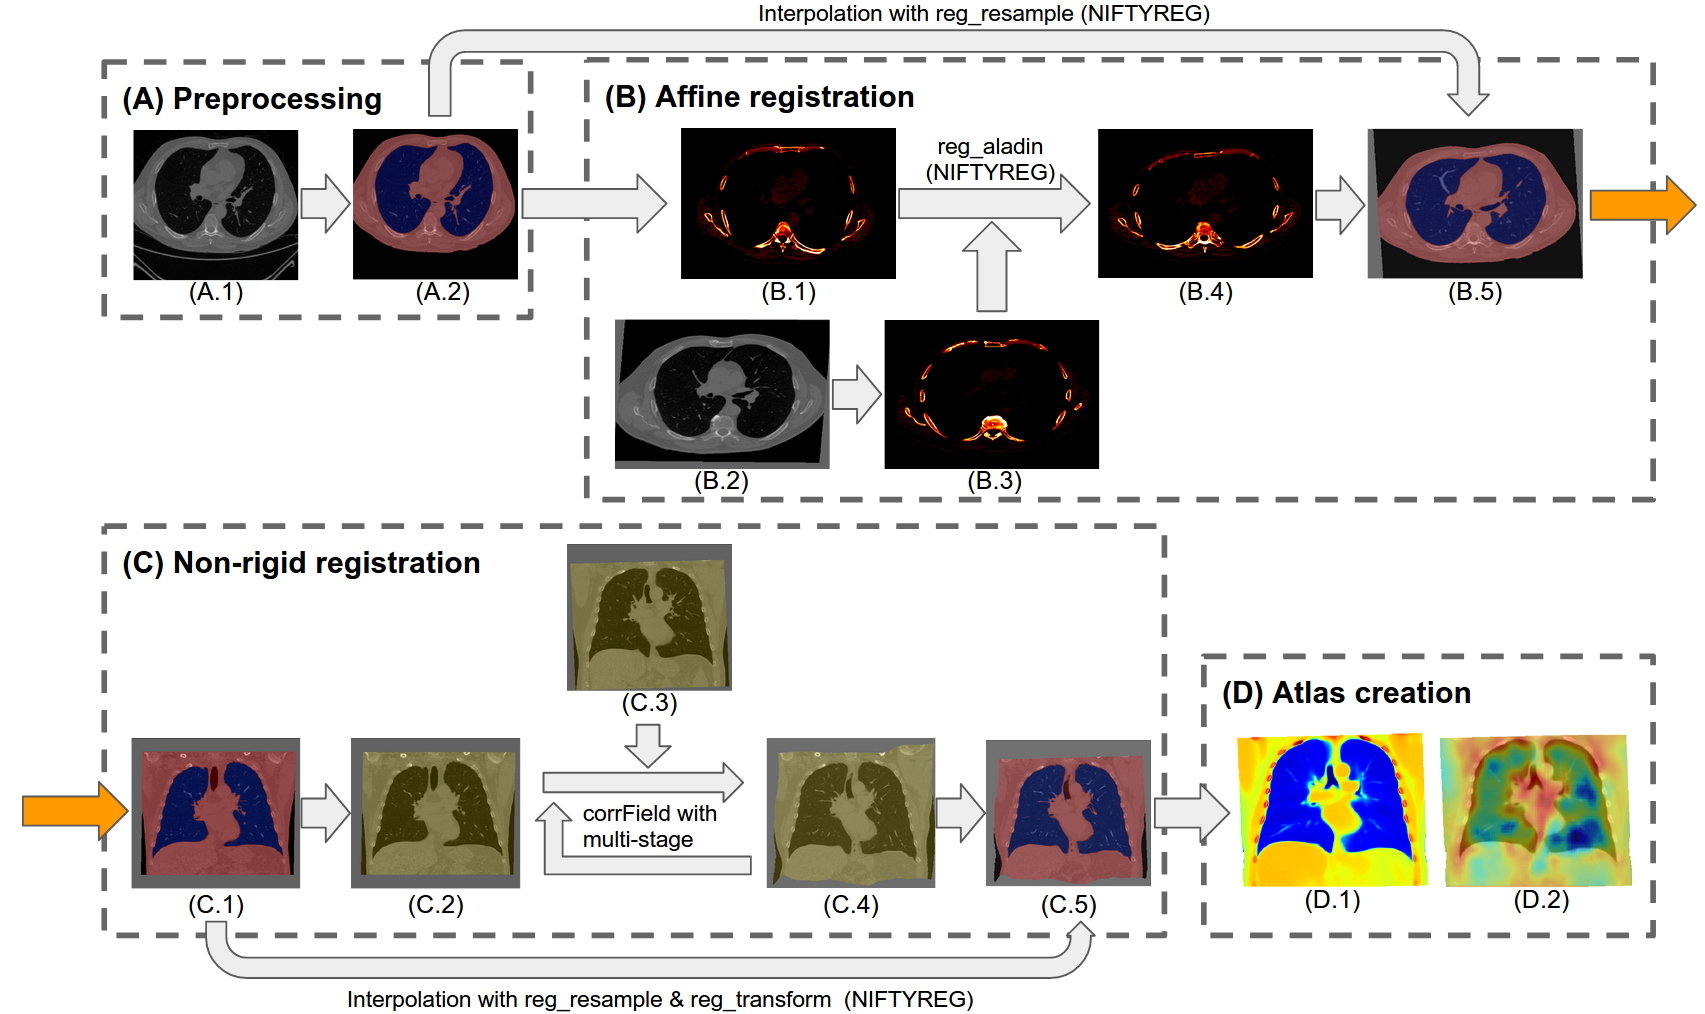 Figure. Four consecutive modules of the atlas creation pipeline. (A) Preprocessing module: (A.1) original moving scan; (A.2) the overlap between the ambient removed scan and lung & body segmentation masks. (B) Affine registration module based on NiftyReg toolbox: (B.1) moving scan with intensity window (0, 1000); (B.2) axial view of reference scan; (B.3) reference scan with intensity window (0, 1000); (B.4) affine registered intensity windowed moving scan; (B.5) interpolation of the preprocessed moving scan with the affine registration transformation matrix. (C) Non-rigid registration module based on corrField (registration) and NiftyReg (interpolation): (C.1) affine registered moving scan overlapped with lung and body segmentation masks; (C.2) overlapped with non-NaN region mask; (C.3) reference scan with non-NaN region mask; (C.4) non-rigid deformed moving scan overlapped with deformed non-NaN region mask; (C.5) non-rigid deformed moving scan overlapped with deformed lung / body masks. (D) Atlas creation module: (D.1) average atlas of HU; (D.2) average atlas of Jacobian determinant map.